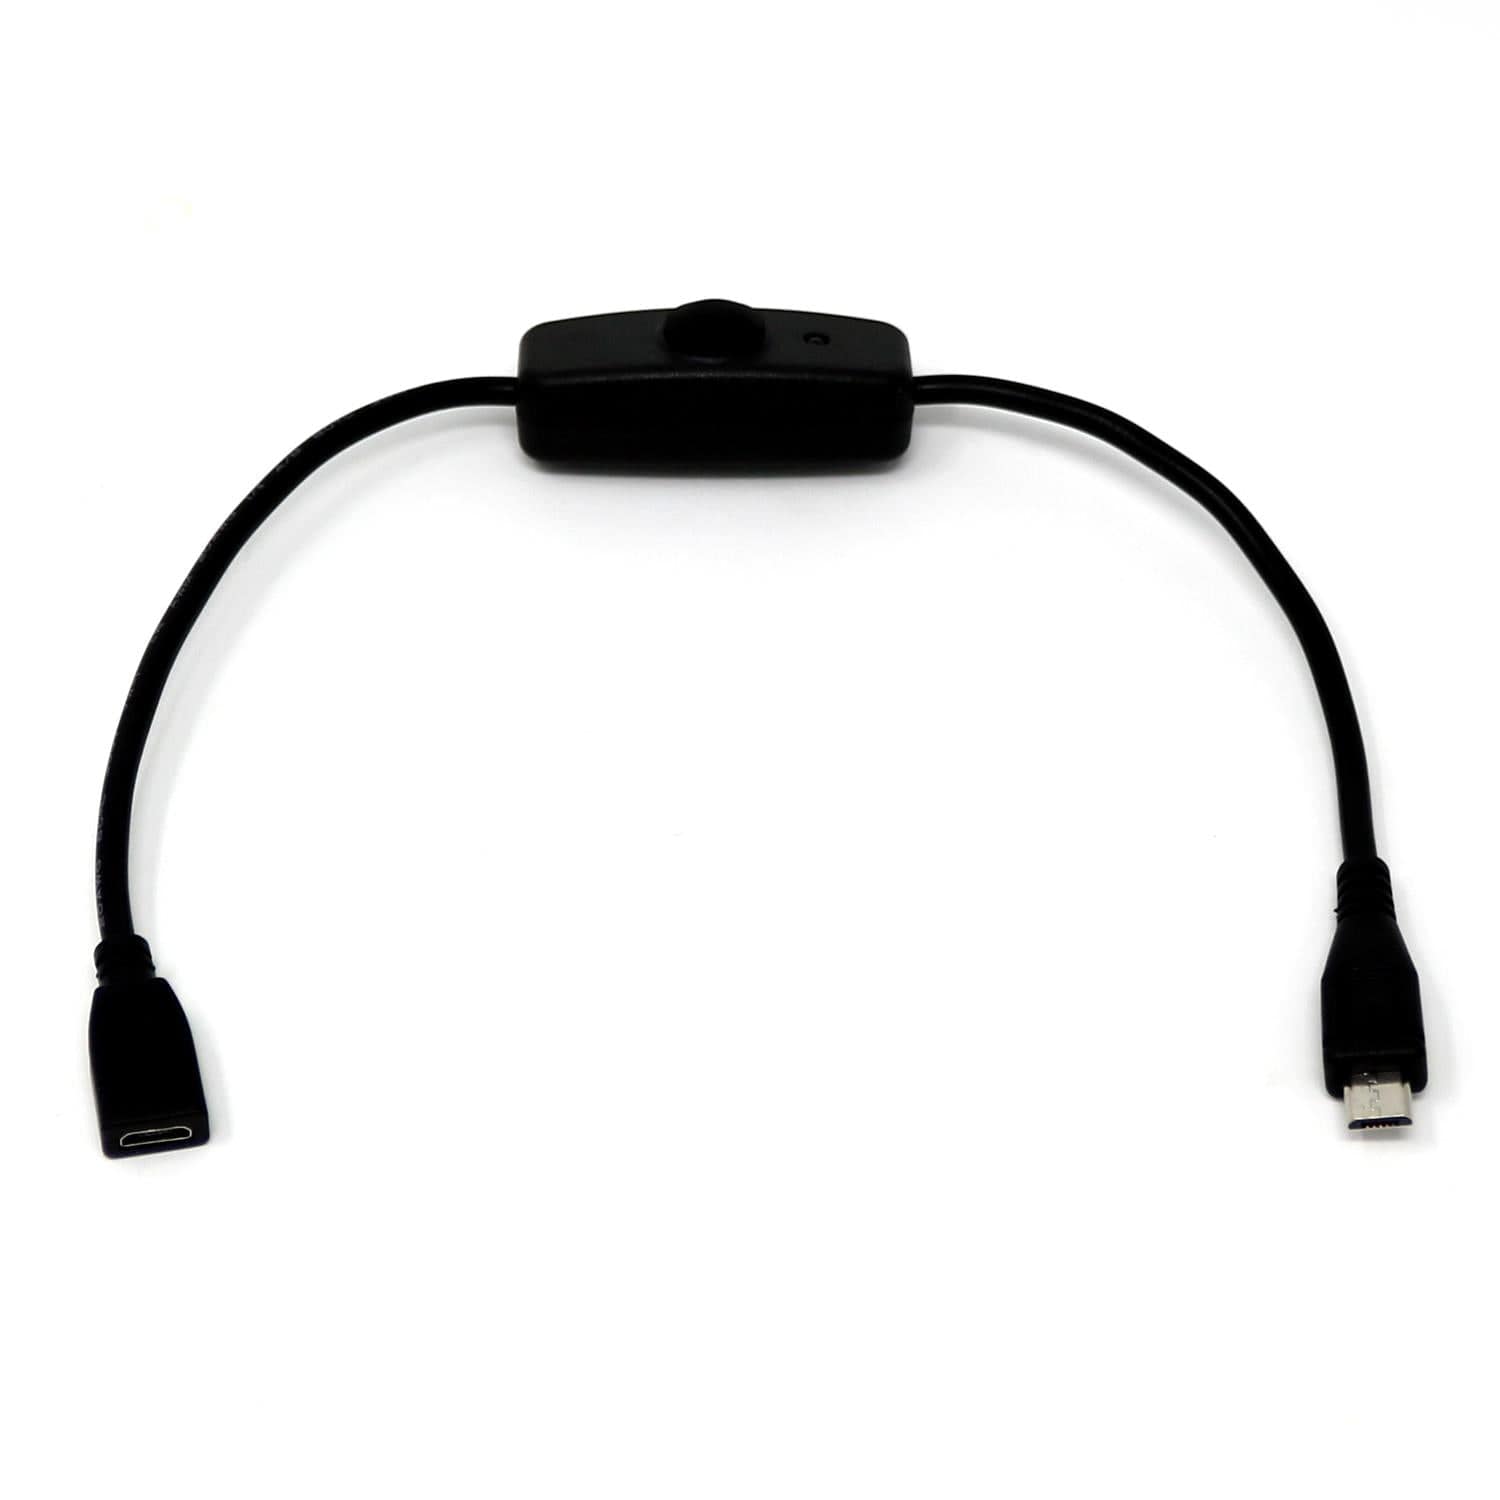 Micro-USB Cable with On/Off Switch